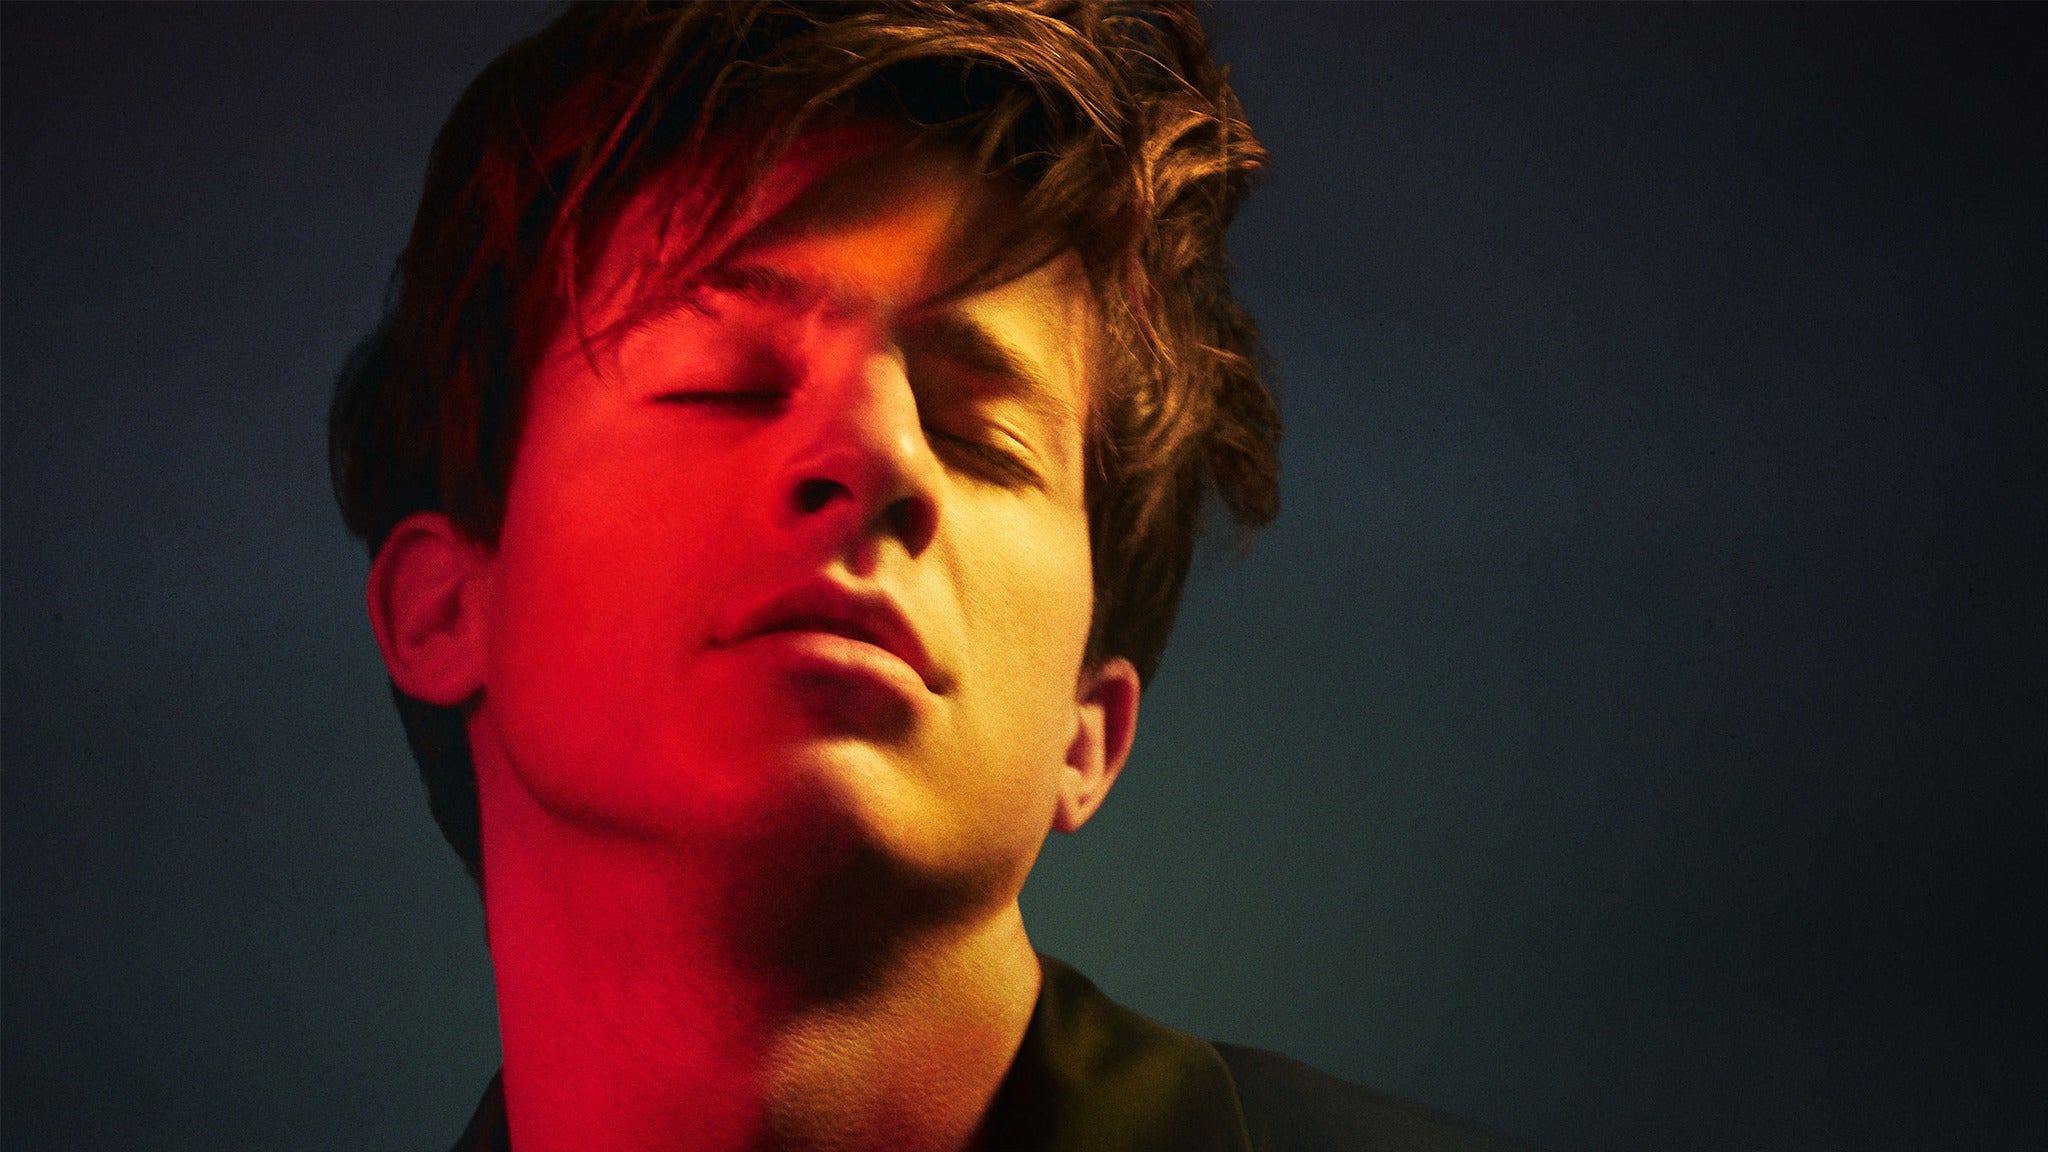 ZPL Birthday Bash 2022 - Charlie Puth with Ava Max in Indianapolis promo photo for TCU Employee  presale offer code